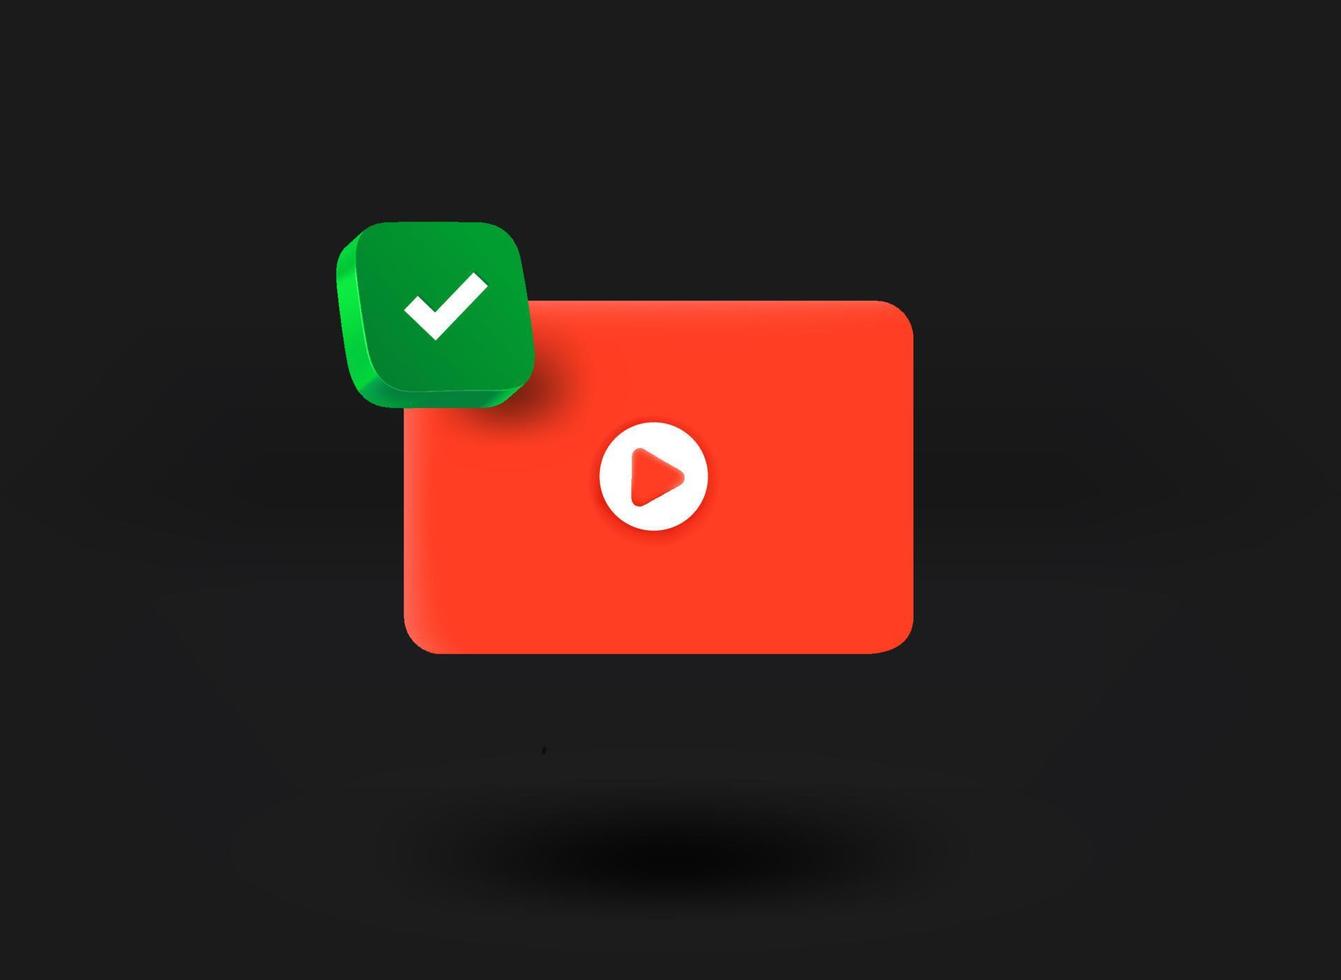 Video file window with checkmark icon. 3d vector illustration